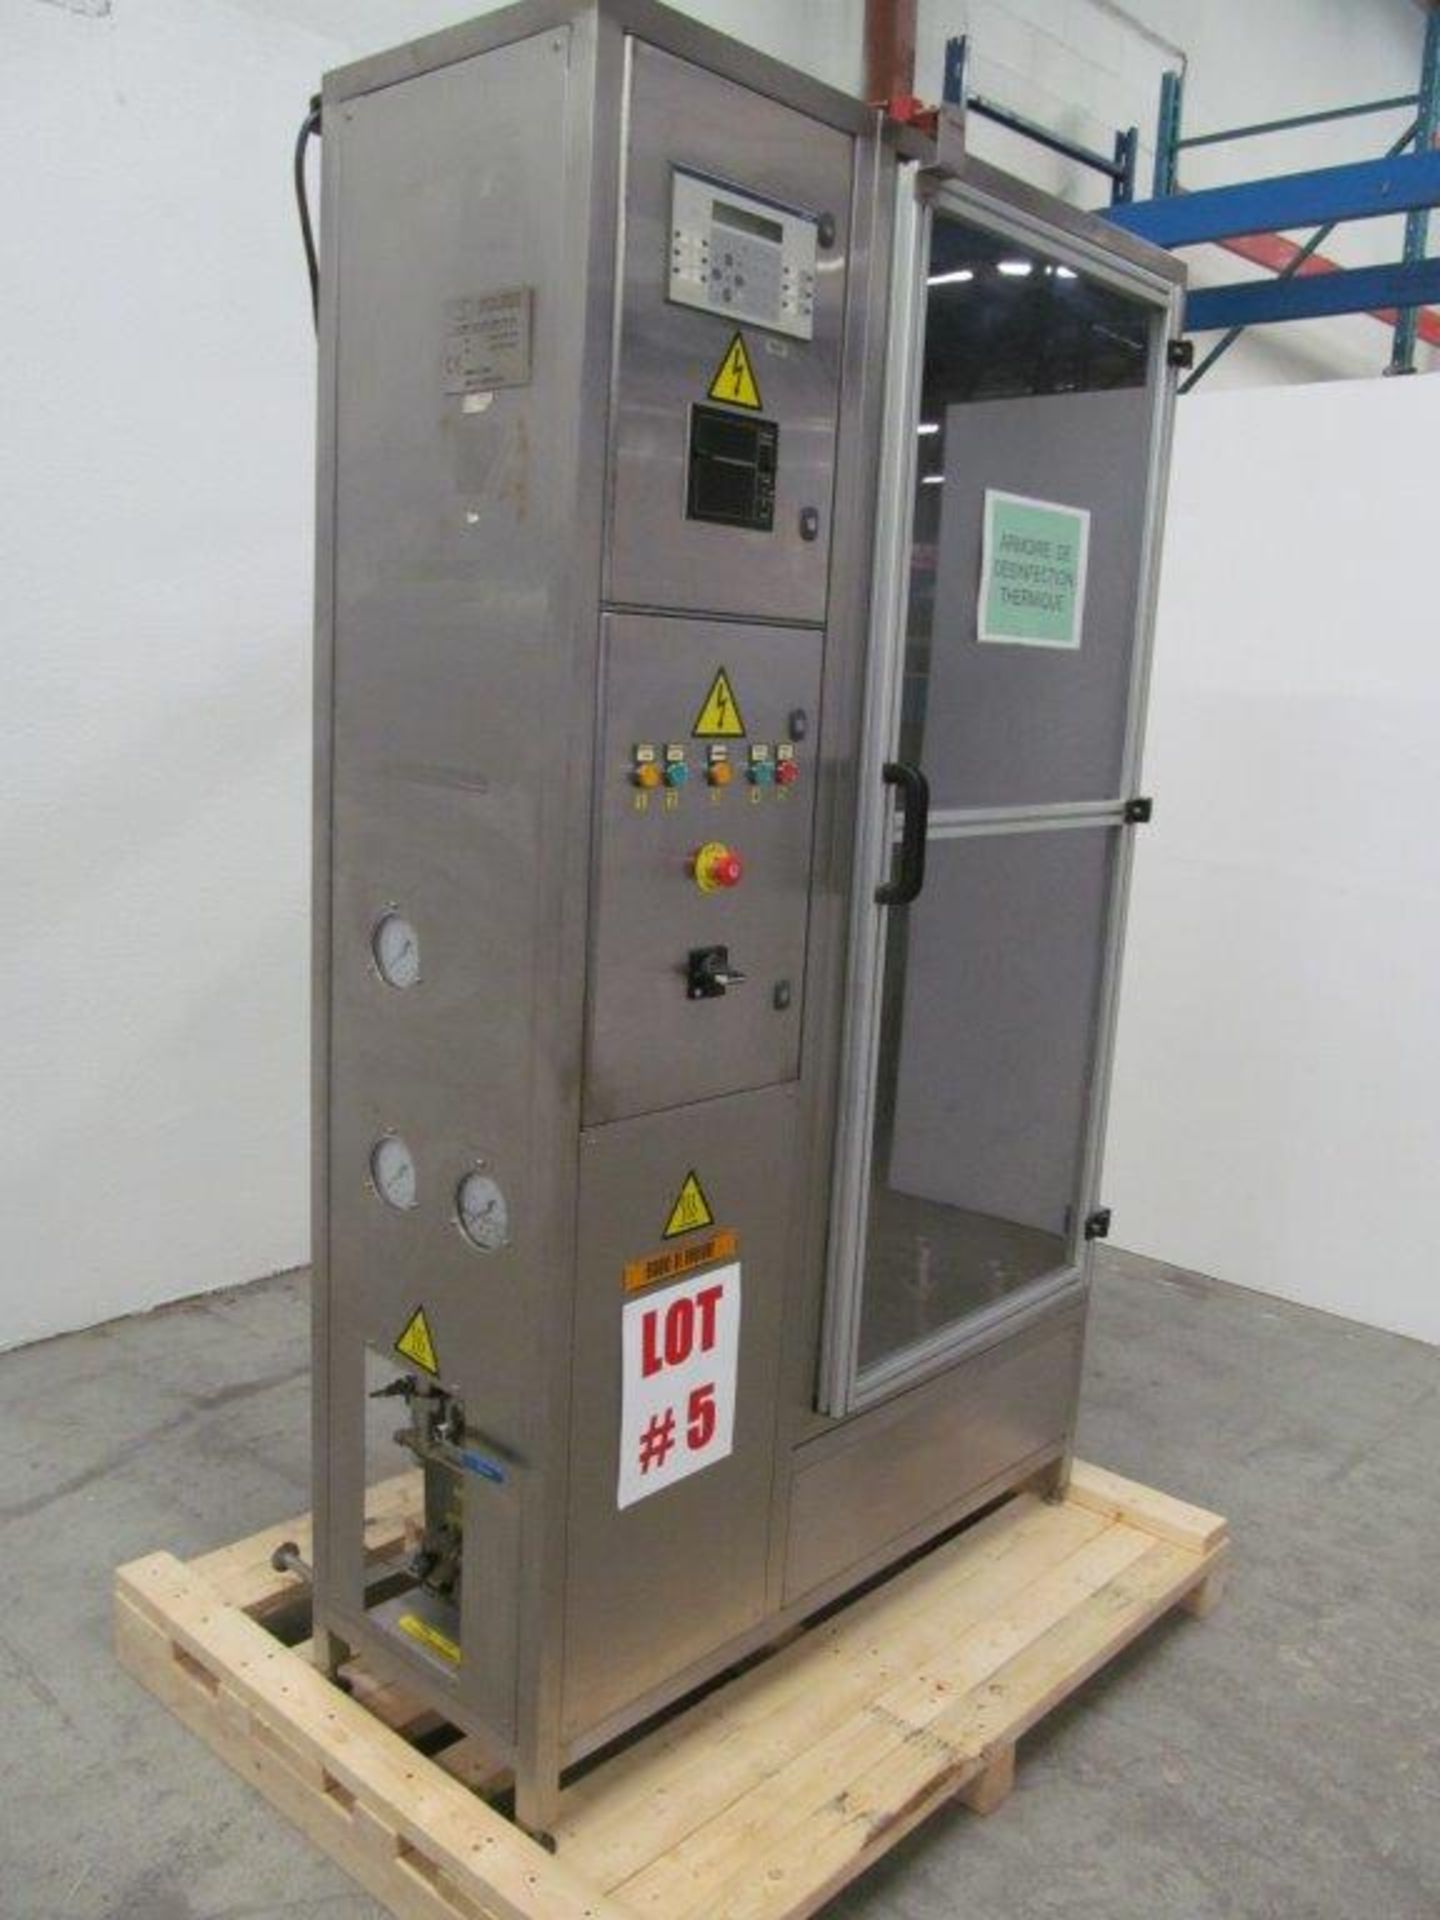 SOLERI THERMAL DESINFECTION CABINET, 200 HOURS,YEAR: 1999, 170 VOLTS, DIMENSION: 4X3X8, WEIGHT: - Image 2 of 6